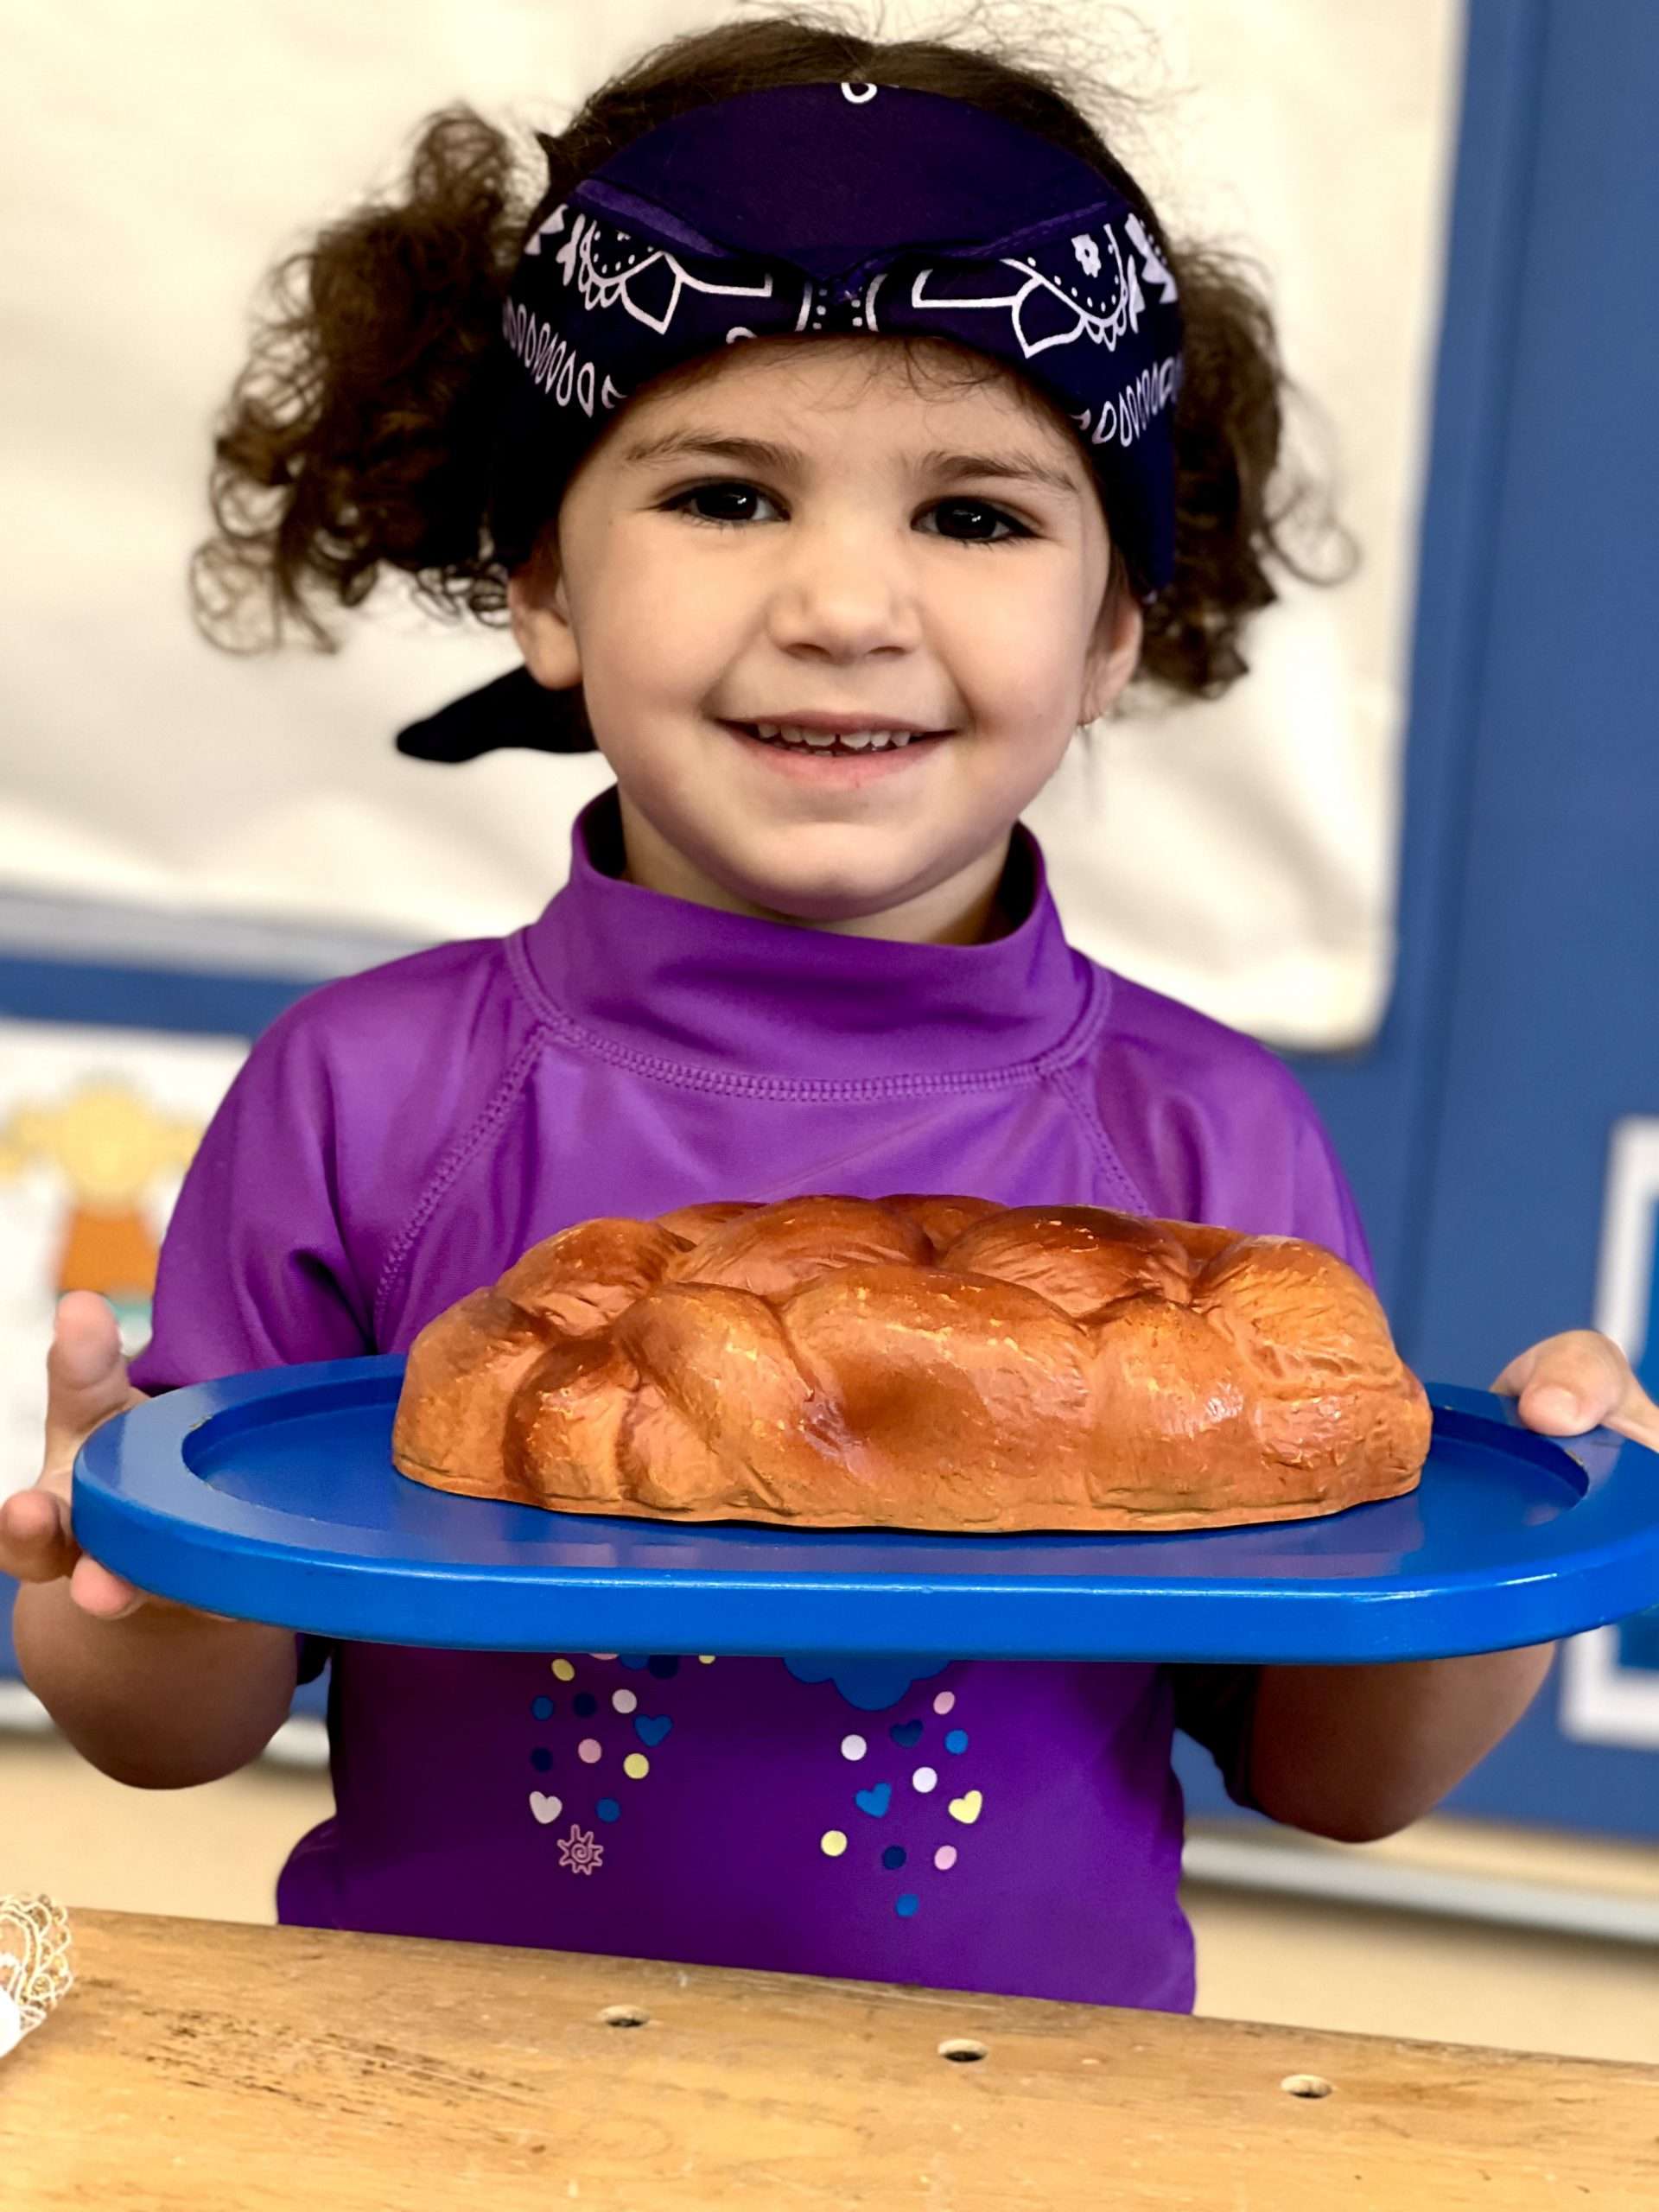 Child smiling and holding a freshly baked challah on a tray.